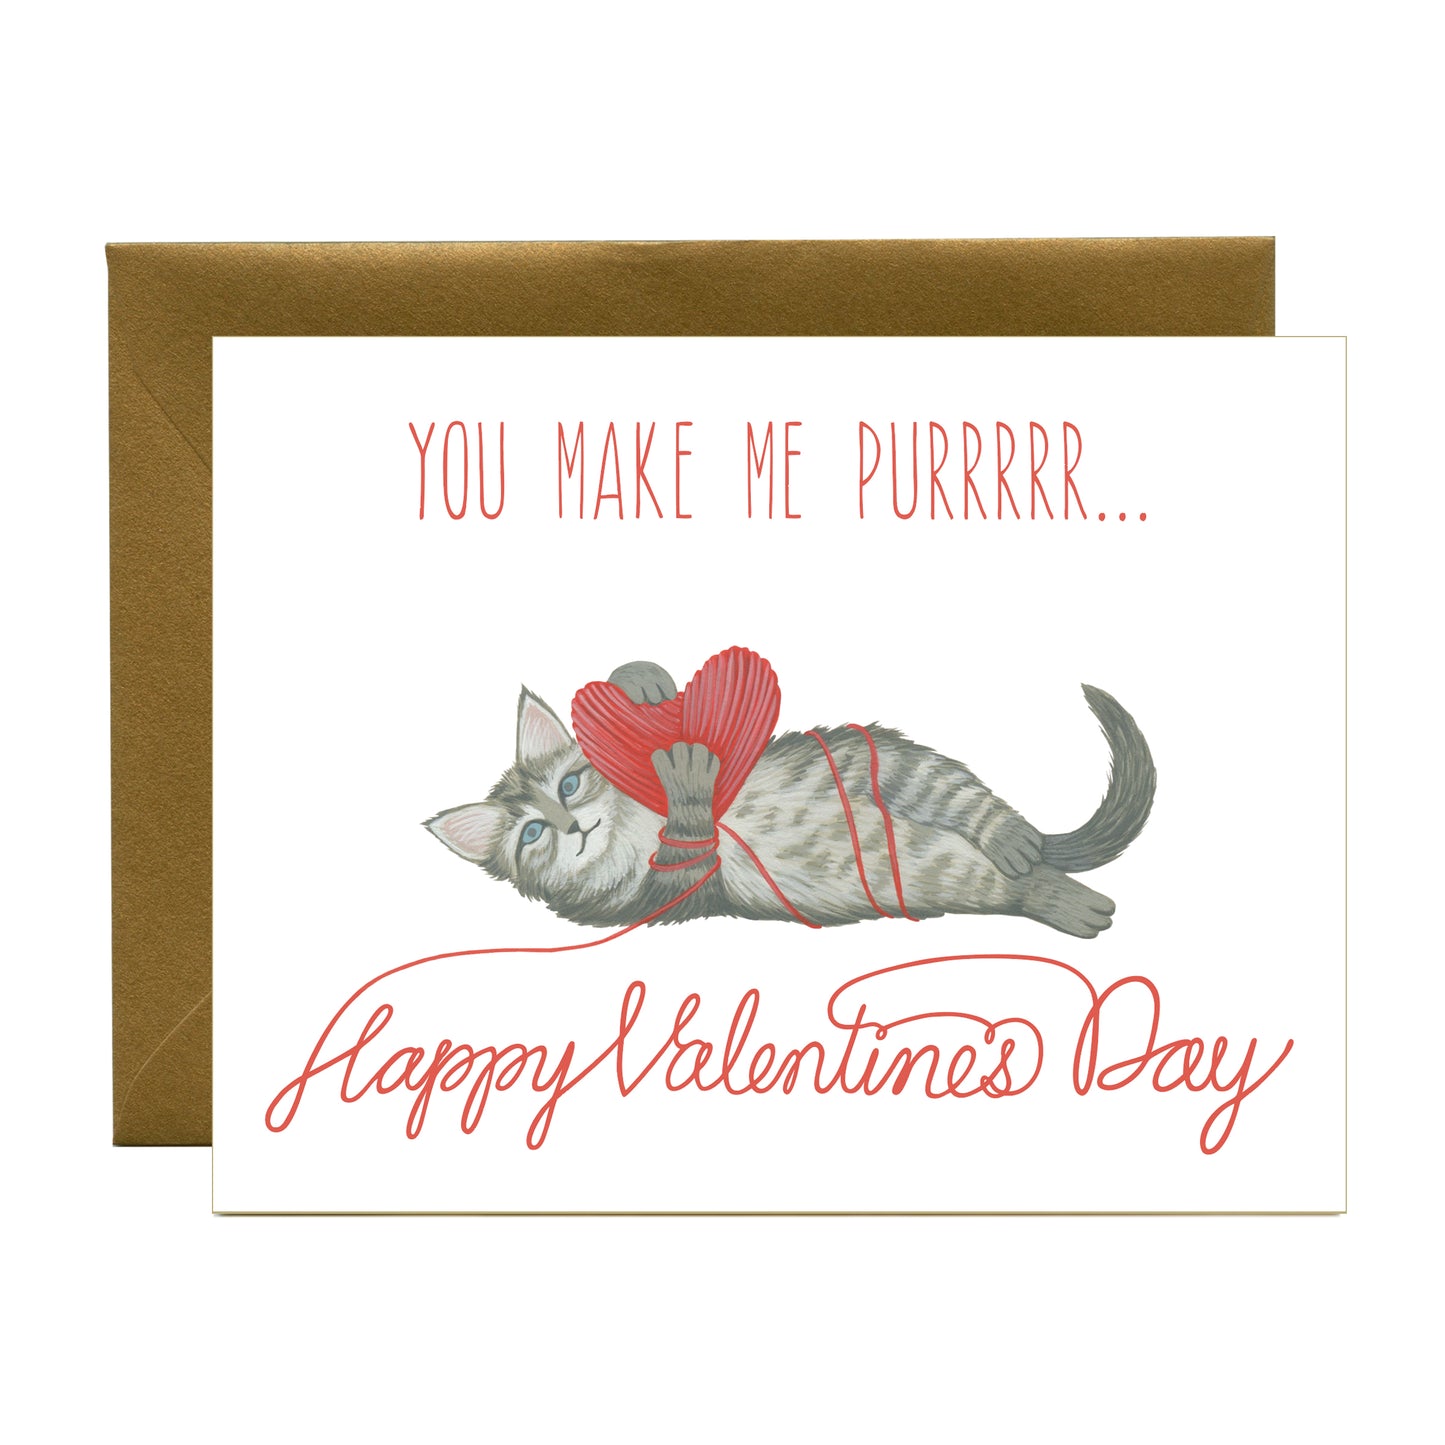 PURRING KITTEN AND BALL OF YARN - VALENTINE'S DAY GREETING CARD